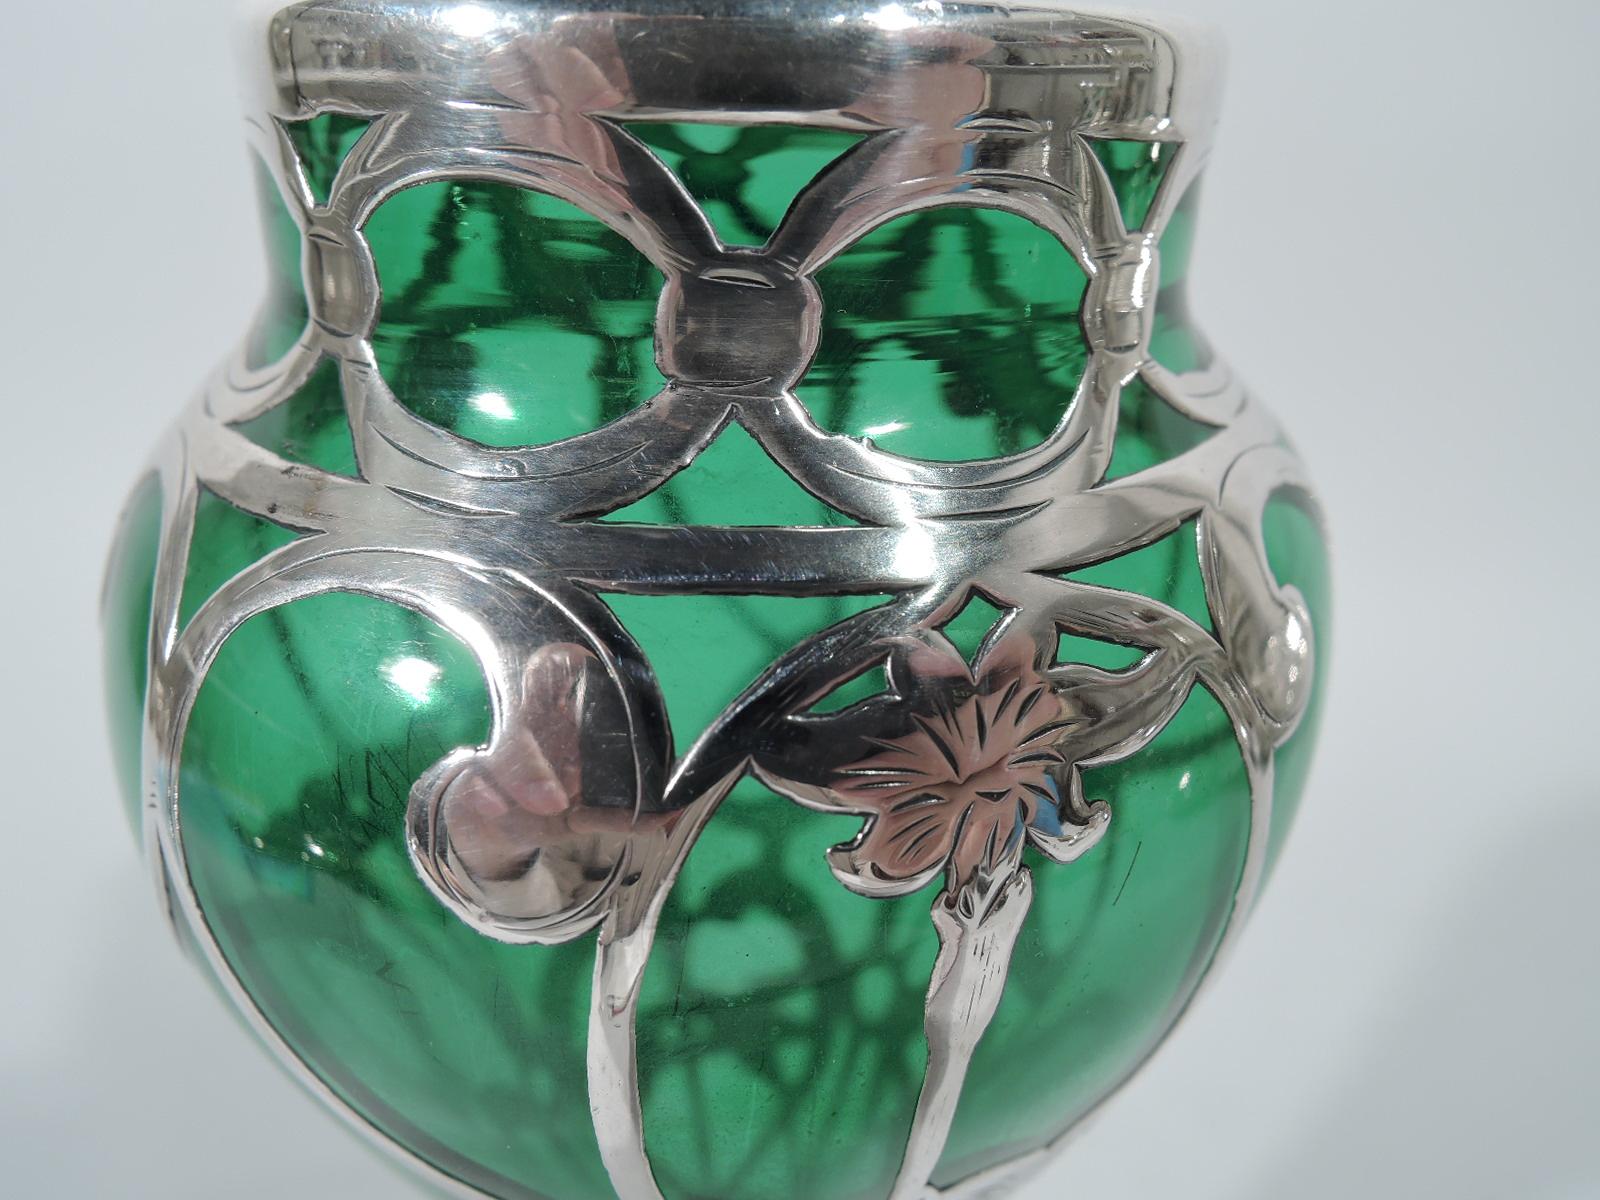 Art Nouveau emerald glass vase with silver overlay. Made by Alvin in Providence. Baluster with short straight neck and round base. Engraved overlay in form of vertical repeating pattern with curvilinear and interlaced stems and flowers. Faint mark.